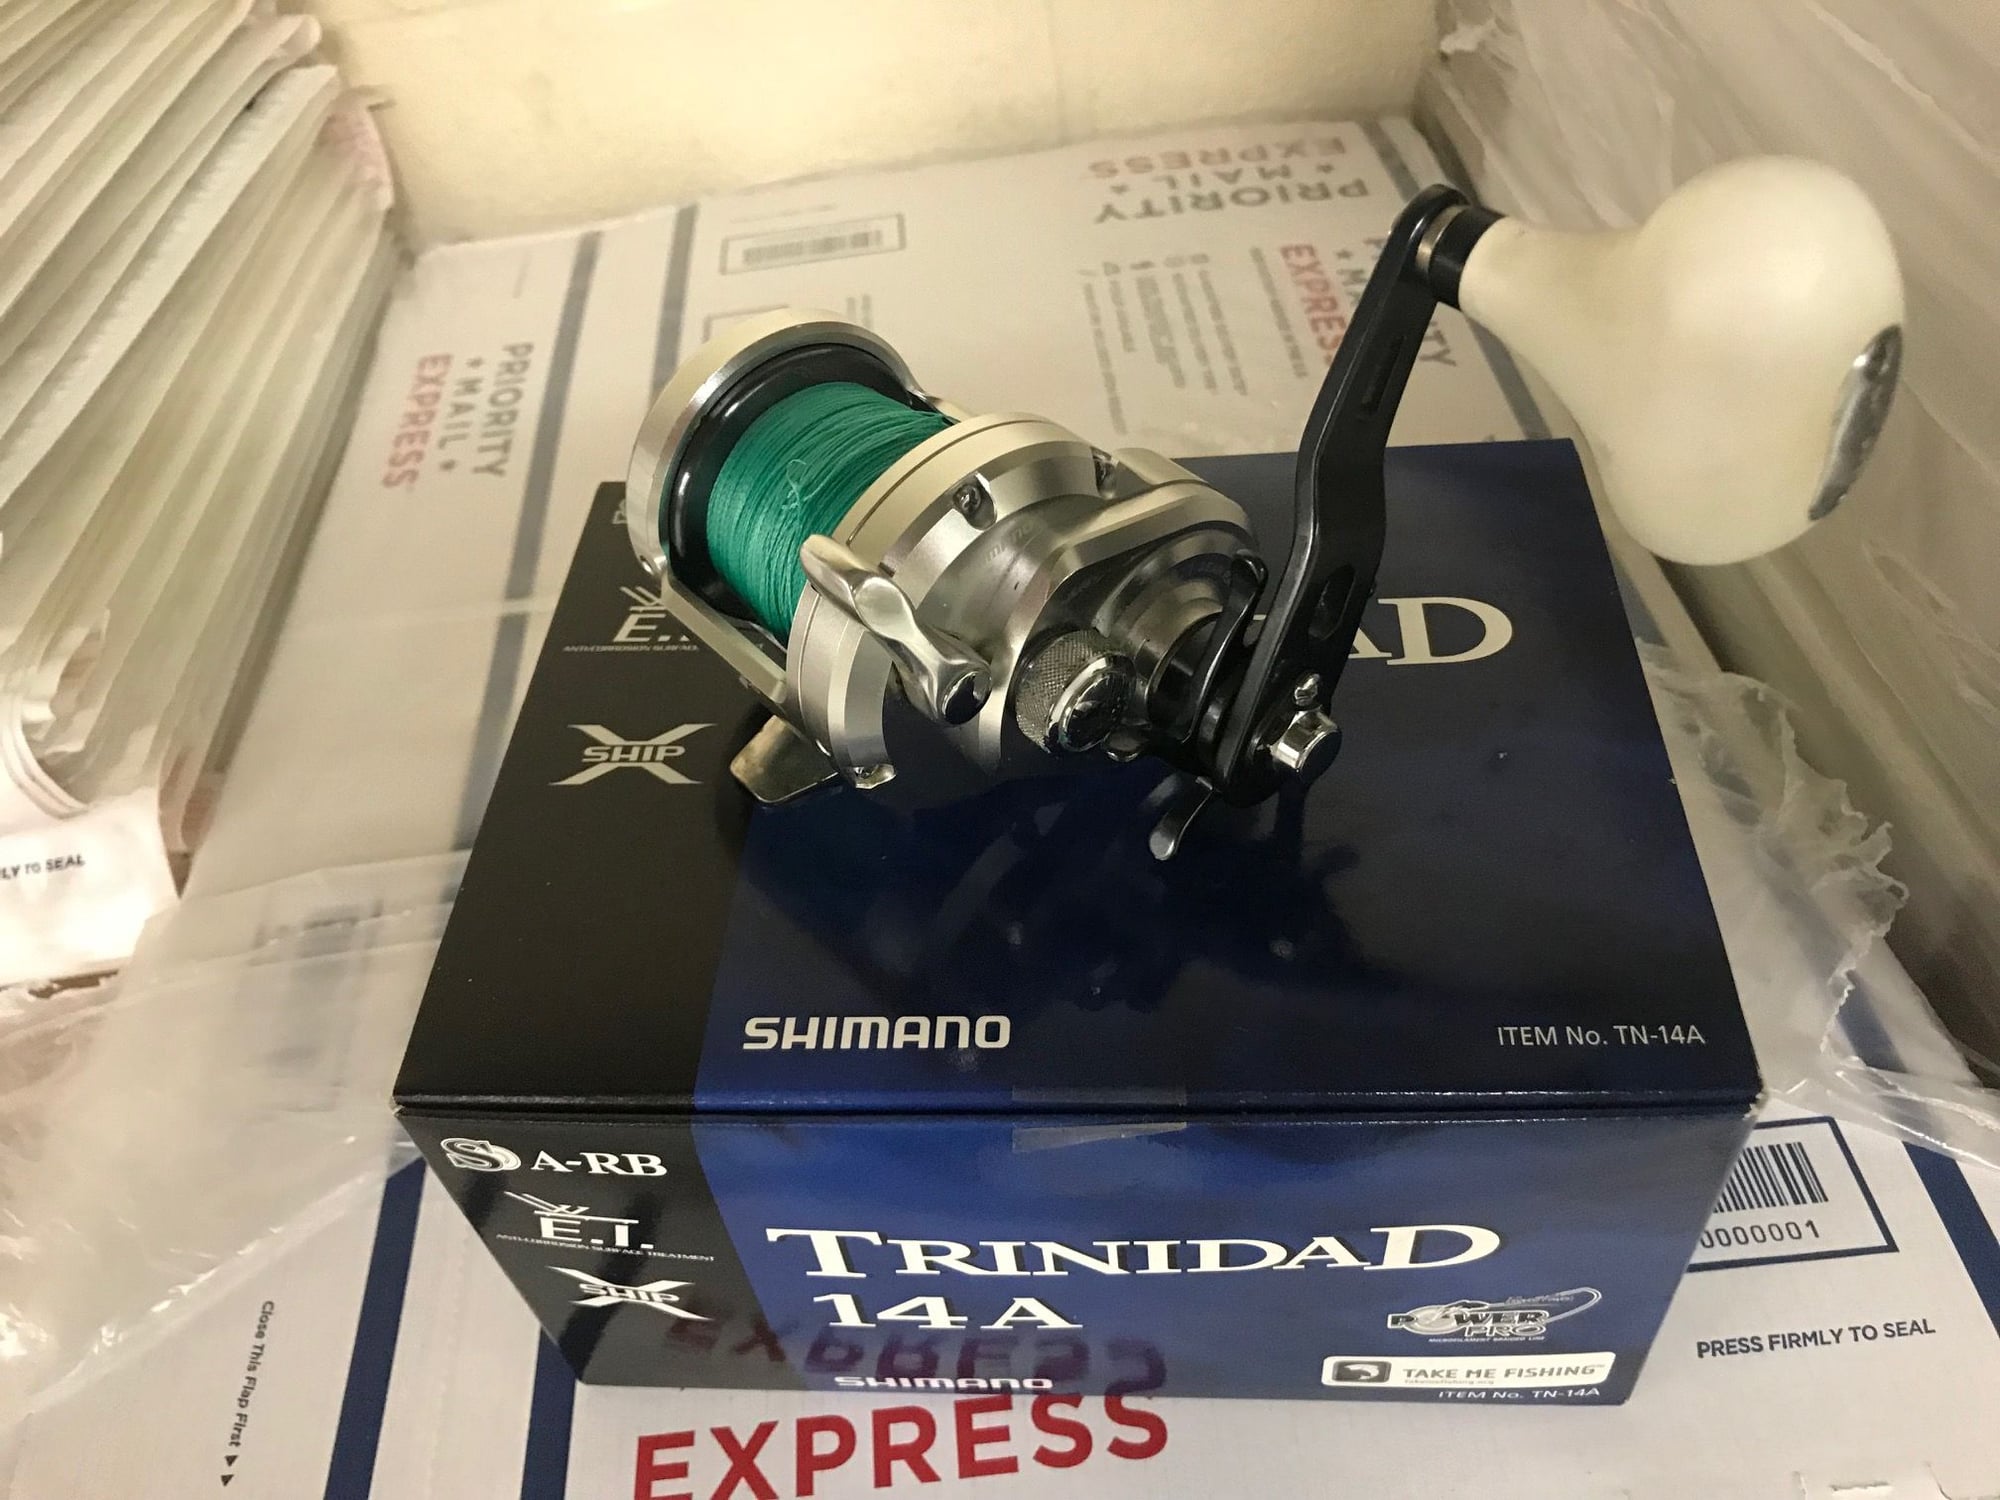 Shimano Trinidad - 14A - sold - The Hull Truth - Boating and Fishing Forum